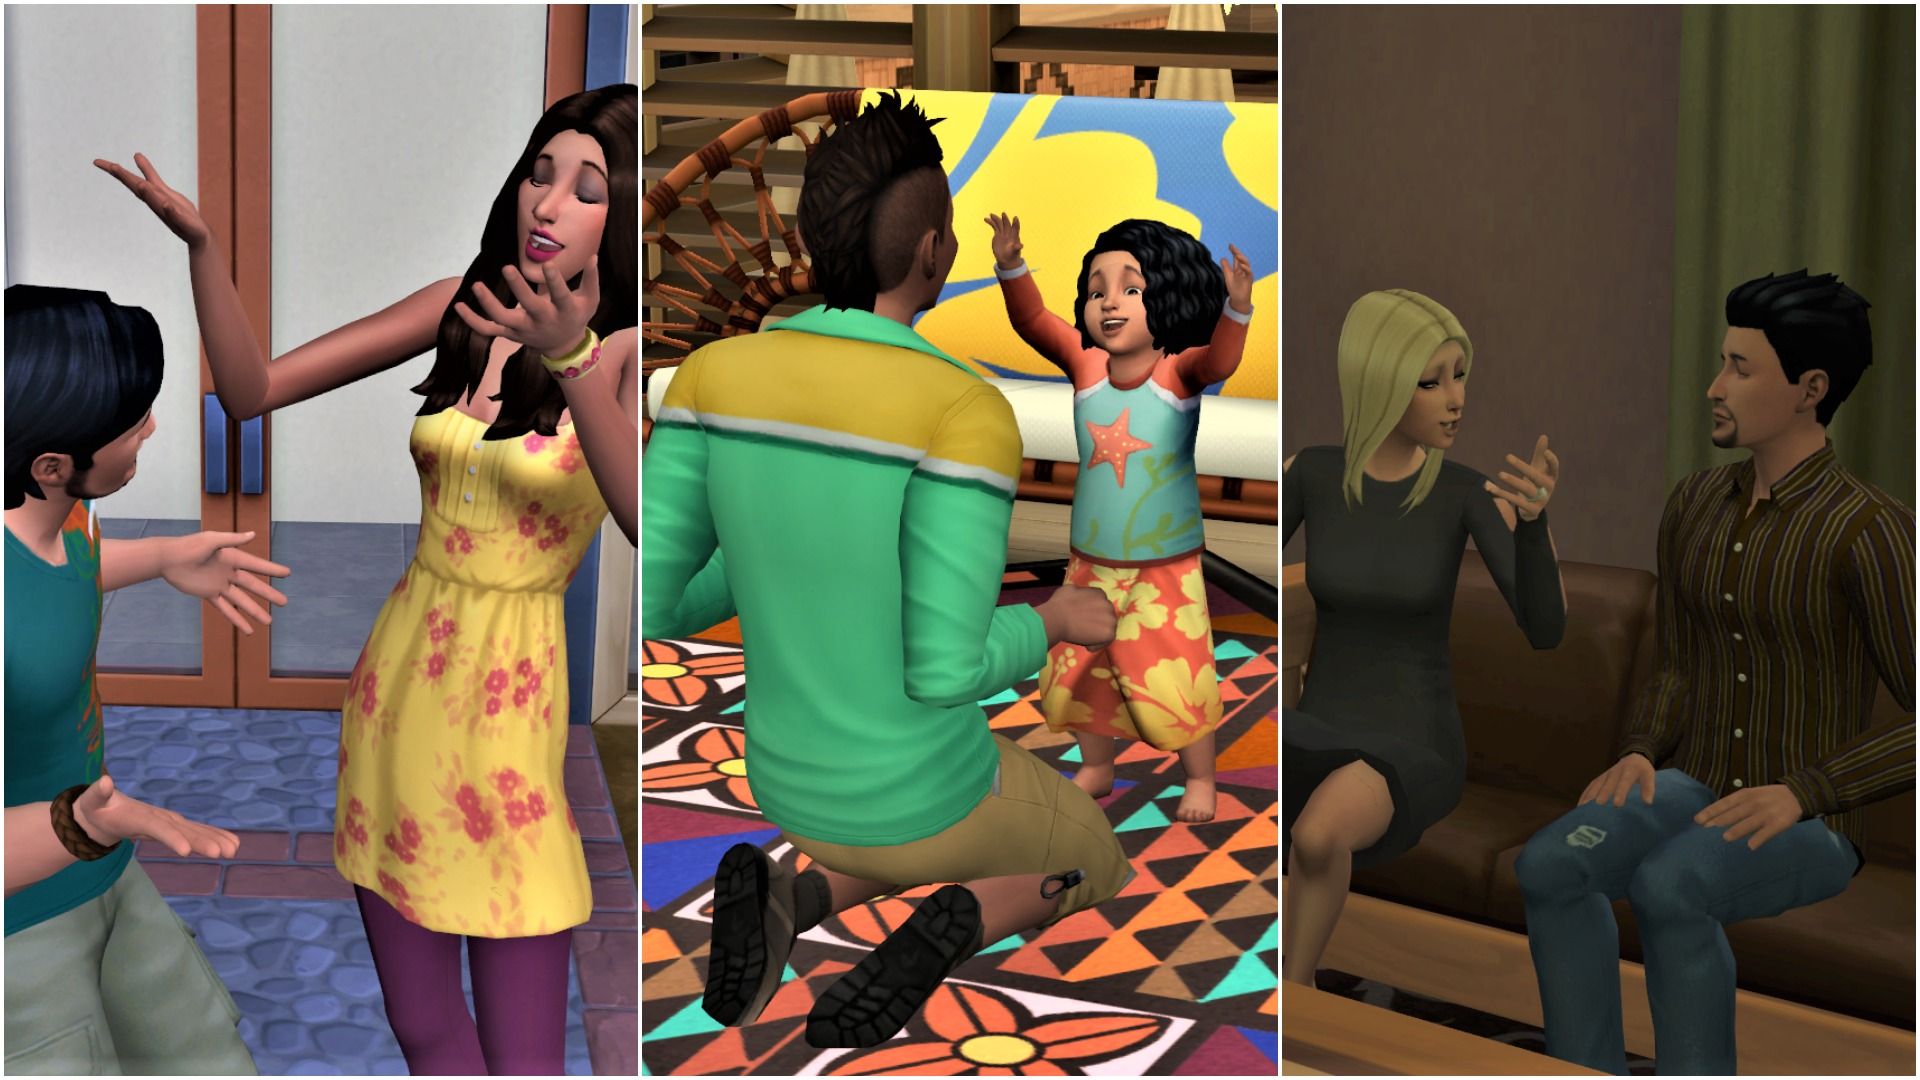 10 Sims 4 Mods That Fix And Enhance Vanilla Gameplay